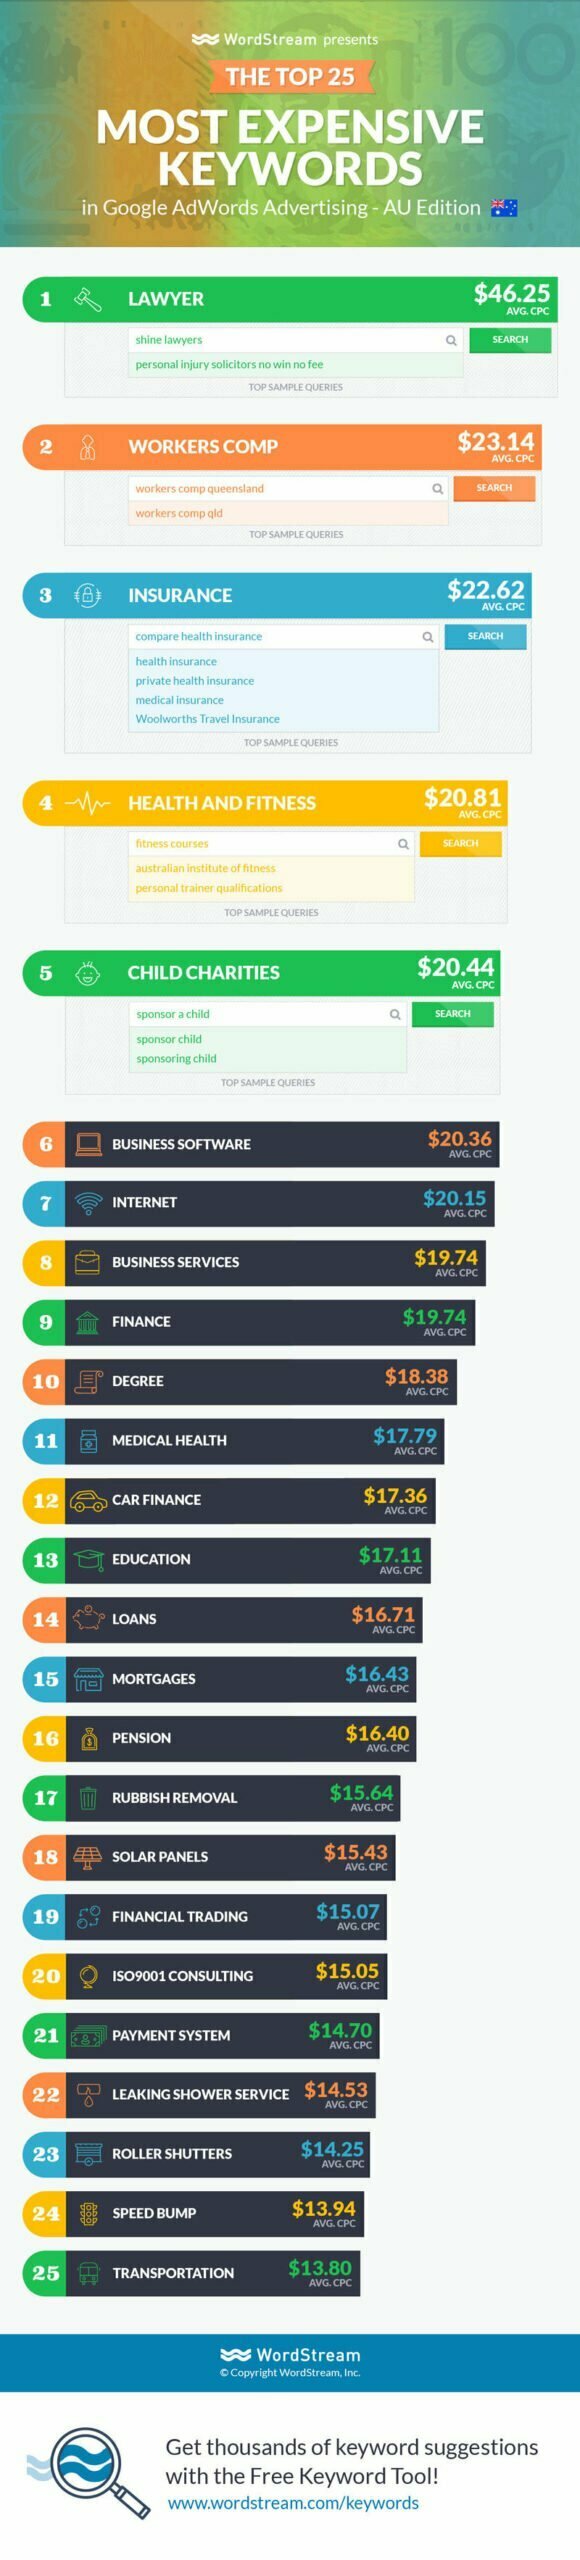 25 Most Expensive Keywords in Australia infographic by wordstream